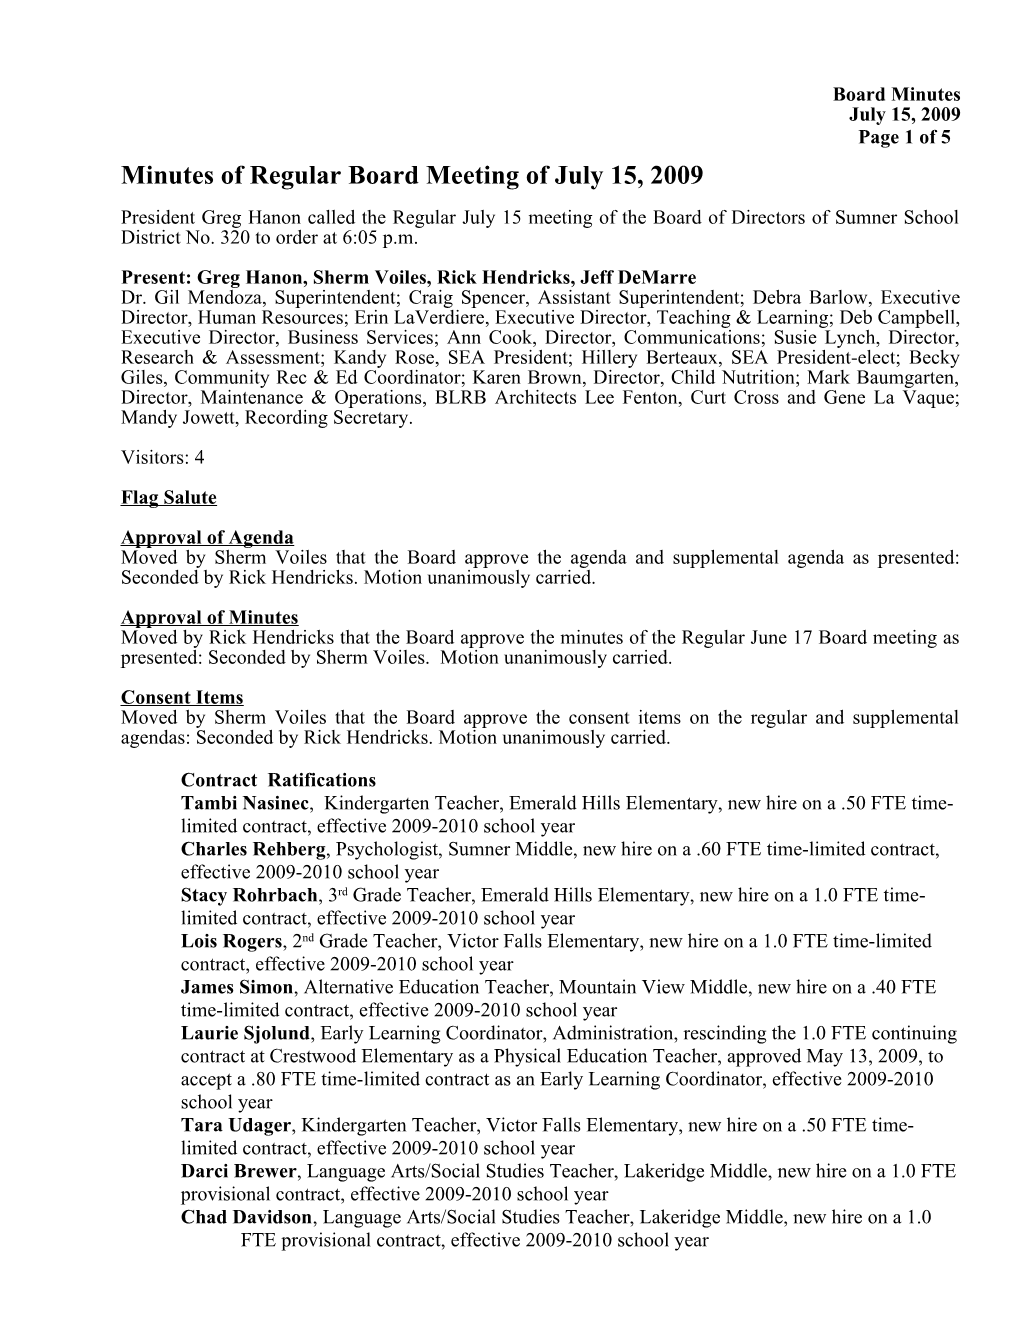 Minutes of Regular Board Meeting of July 15, 2009